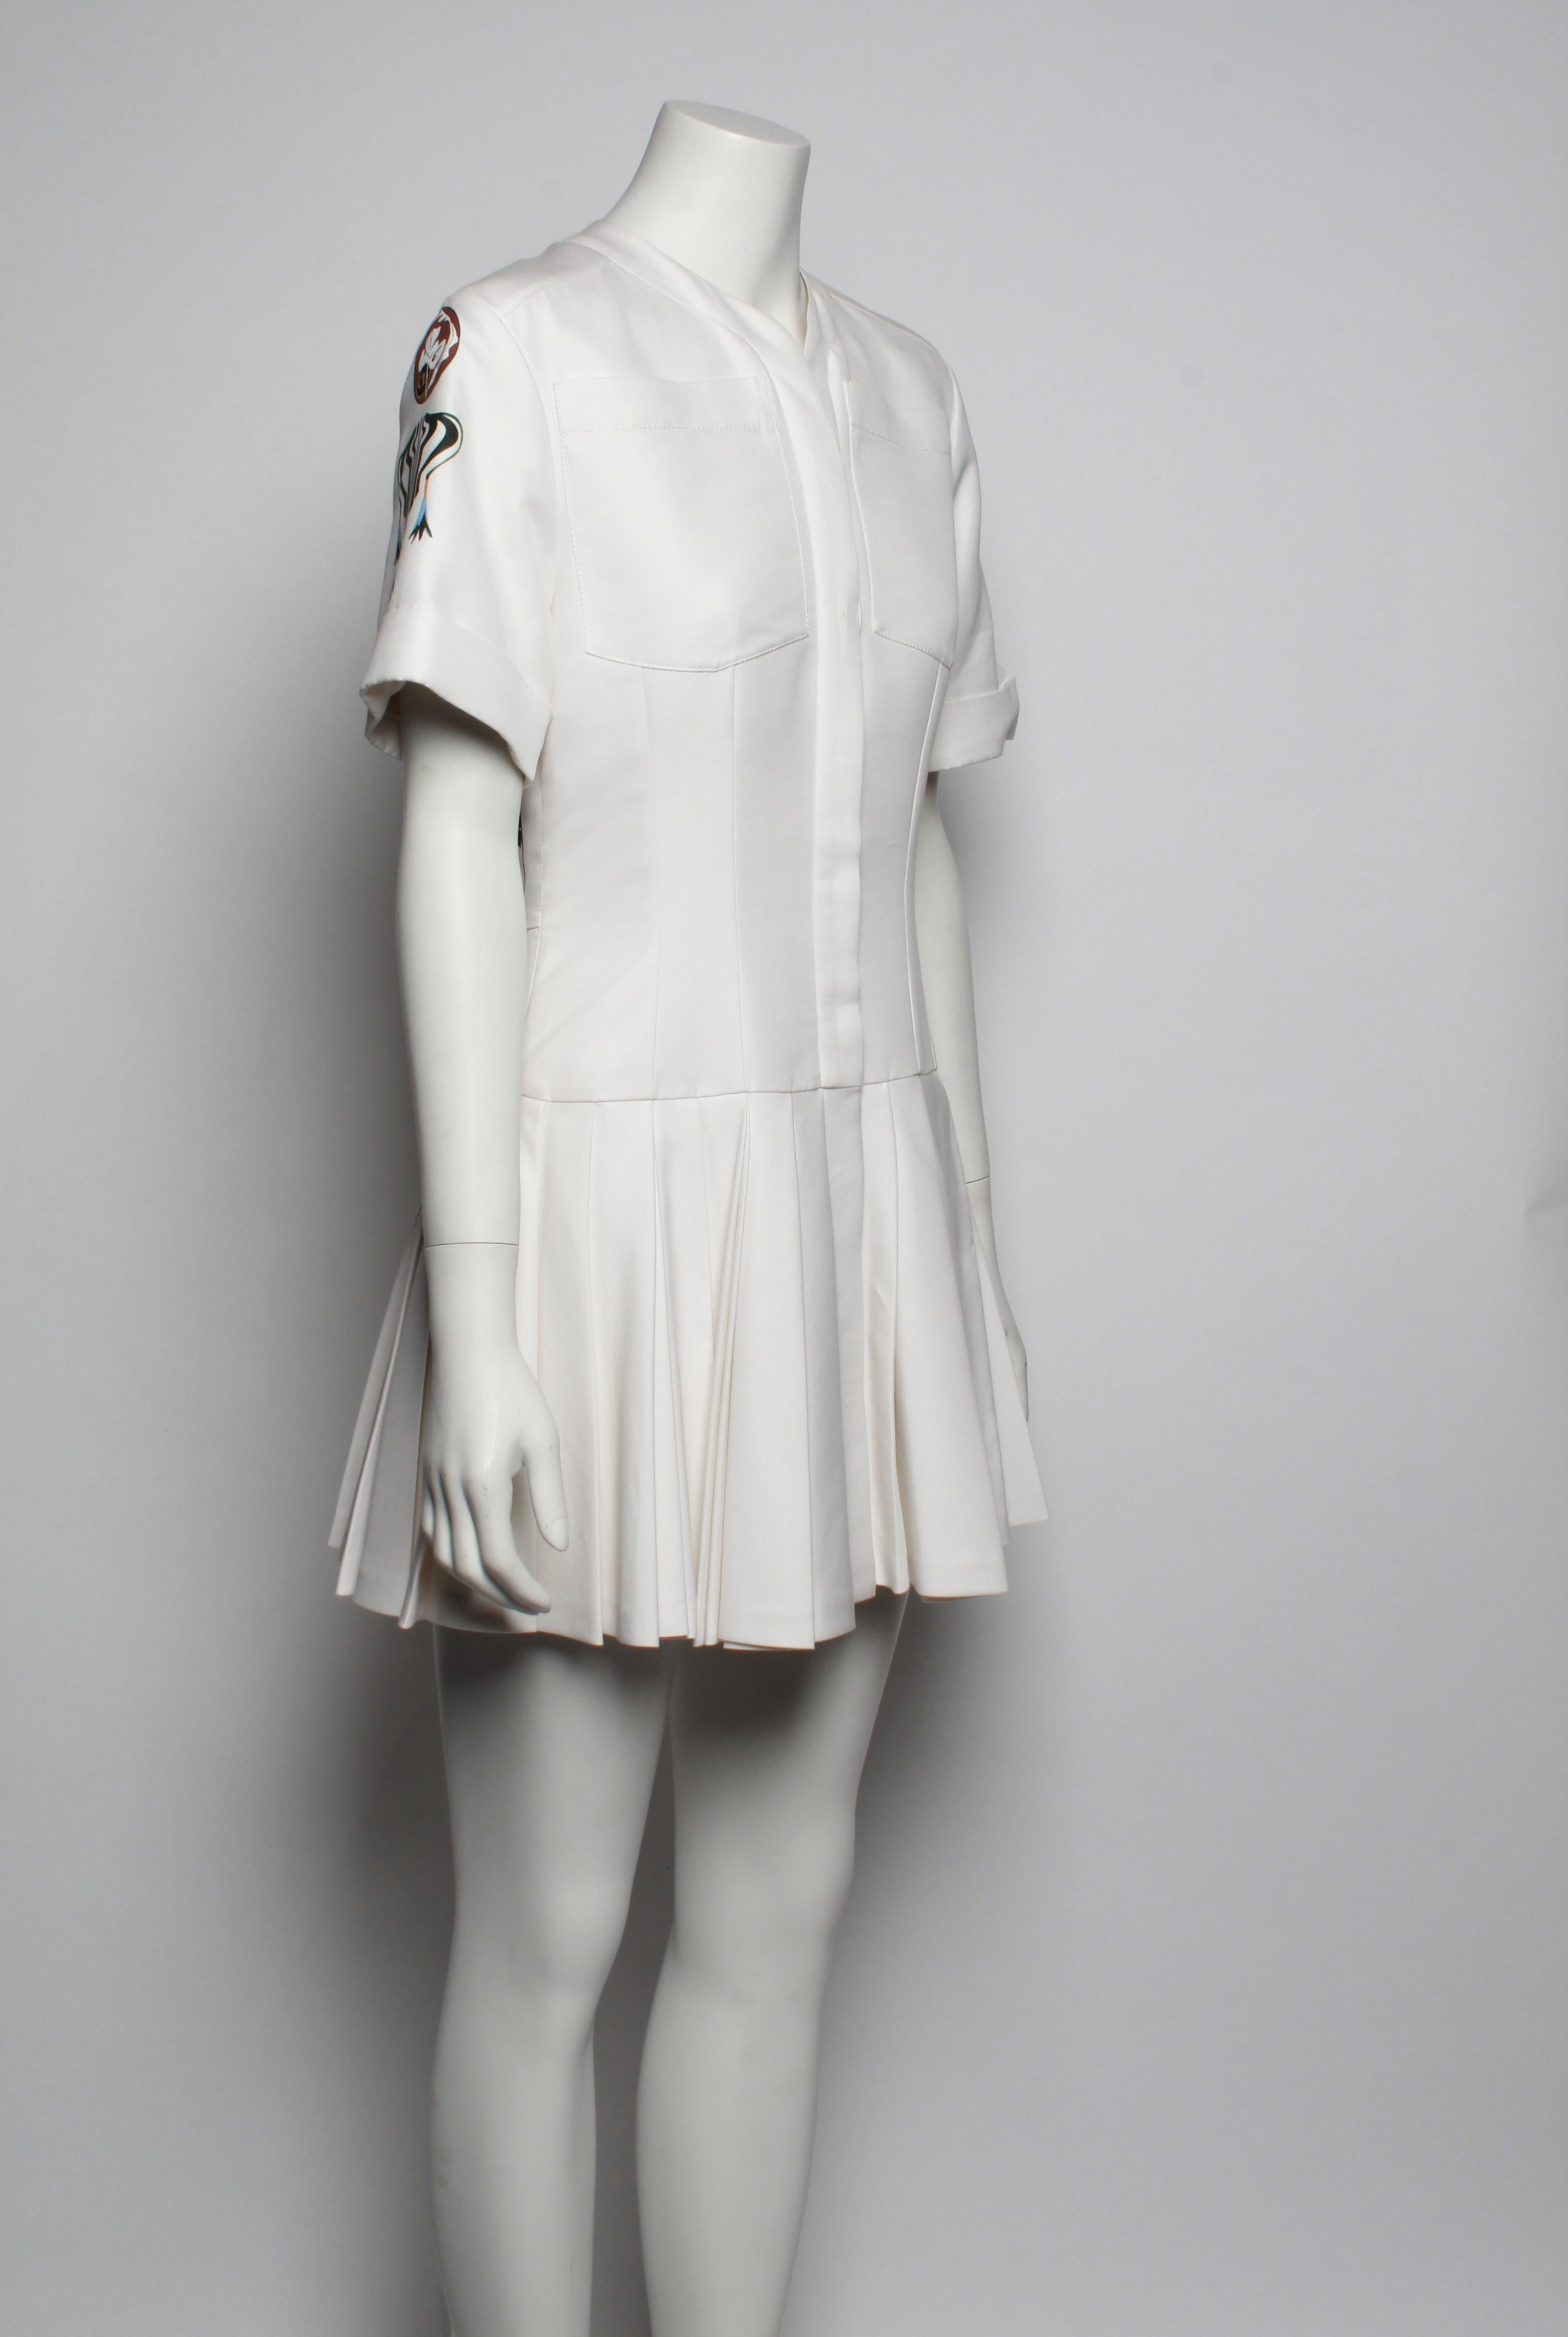 Christian Dior White Pleated Mini Dress From the 2016 Collection features a fitted shirt style bodice with curved neckline, patch breast pockets and short cuffed sleeve with abstract floral CD print. Back features a large floral print, and skirt is